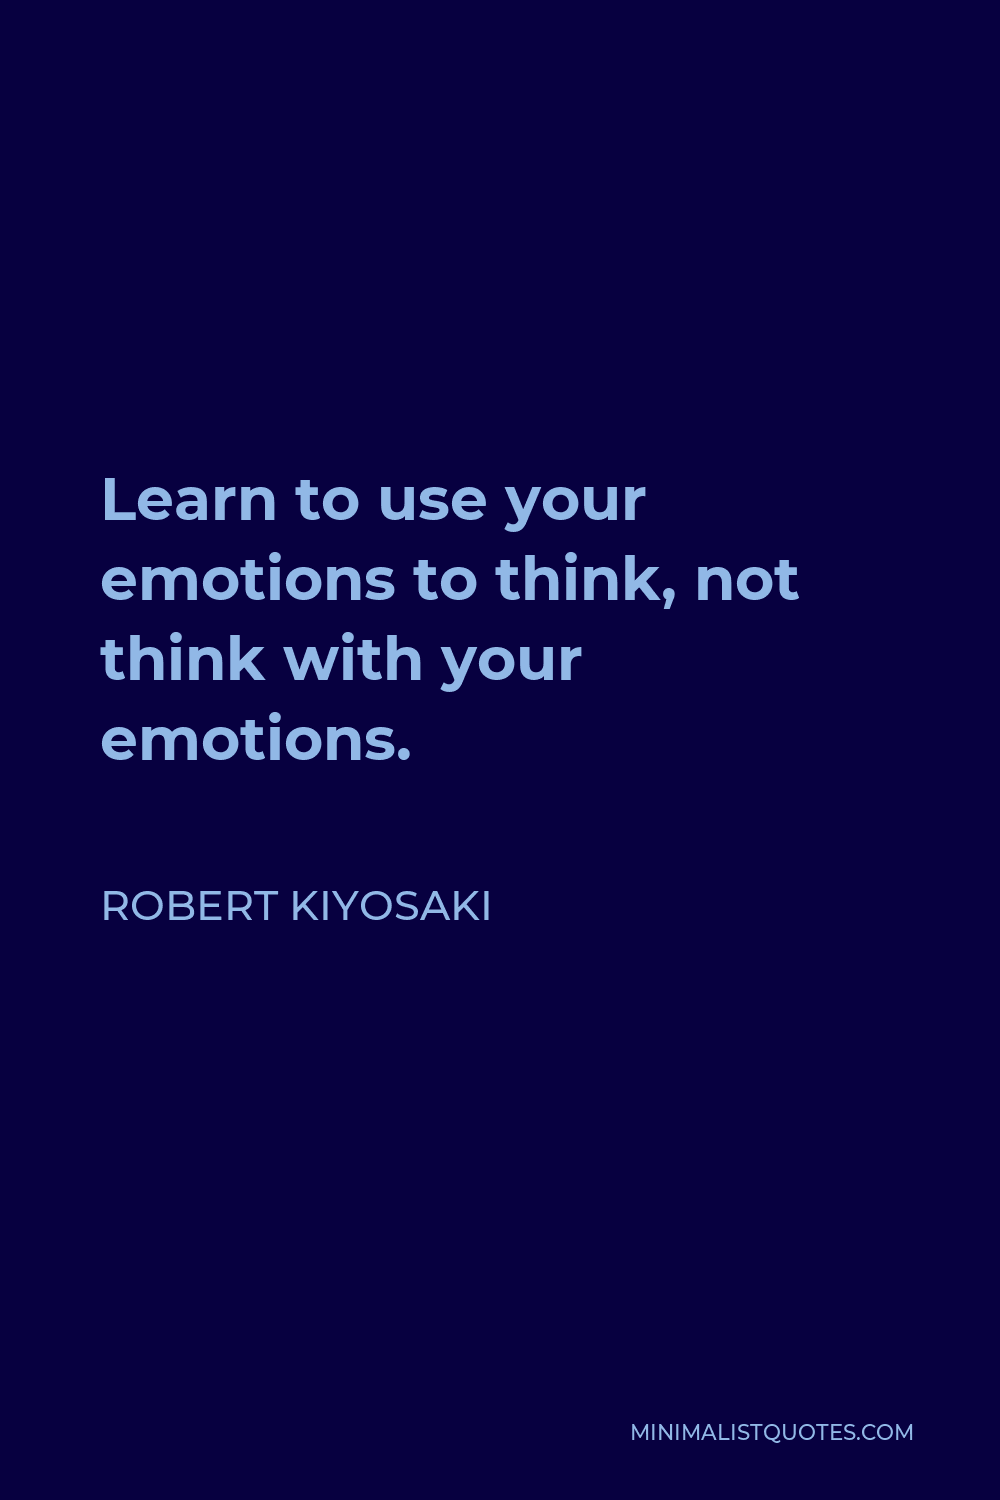 Robert Kiyosaki Quote - Learn to use your emotions to think, not think with your emotions.